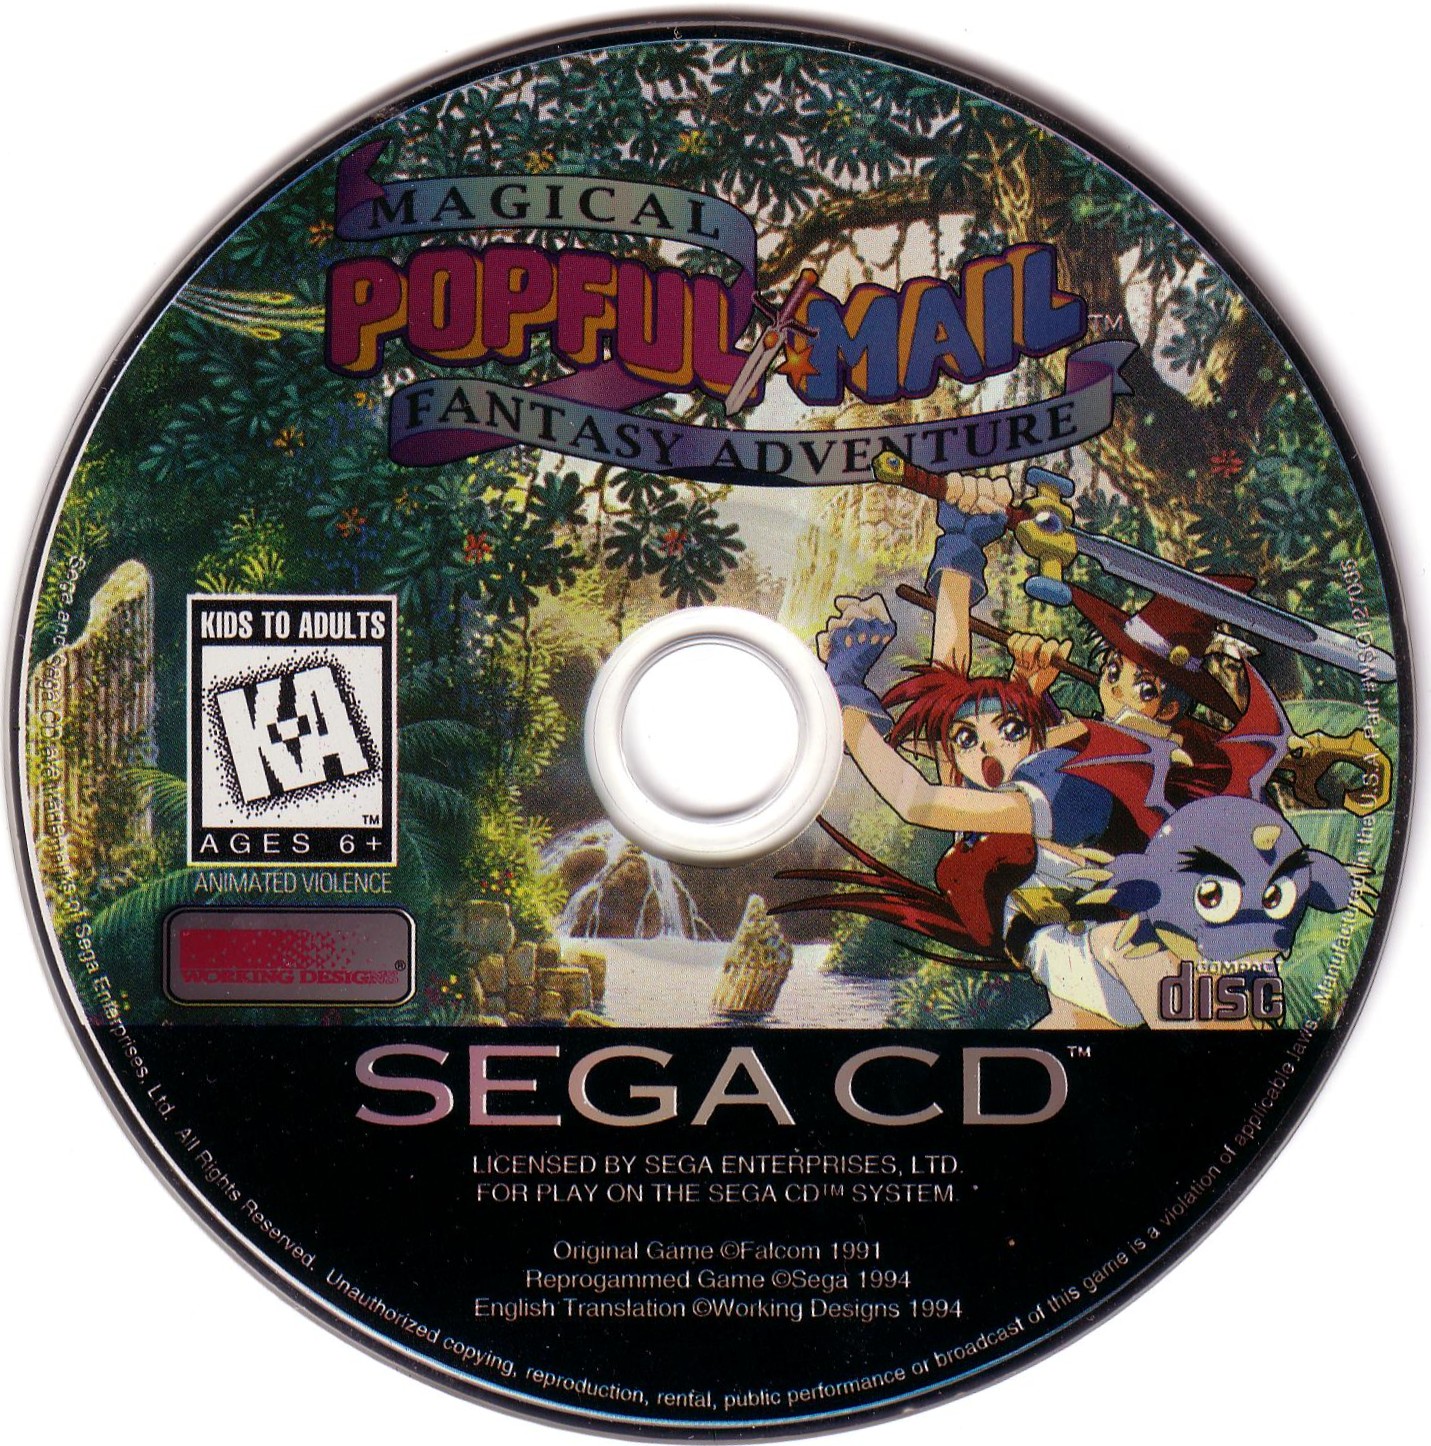 Popful Mail Pics, Video Game Collection